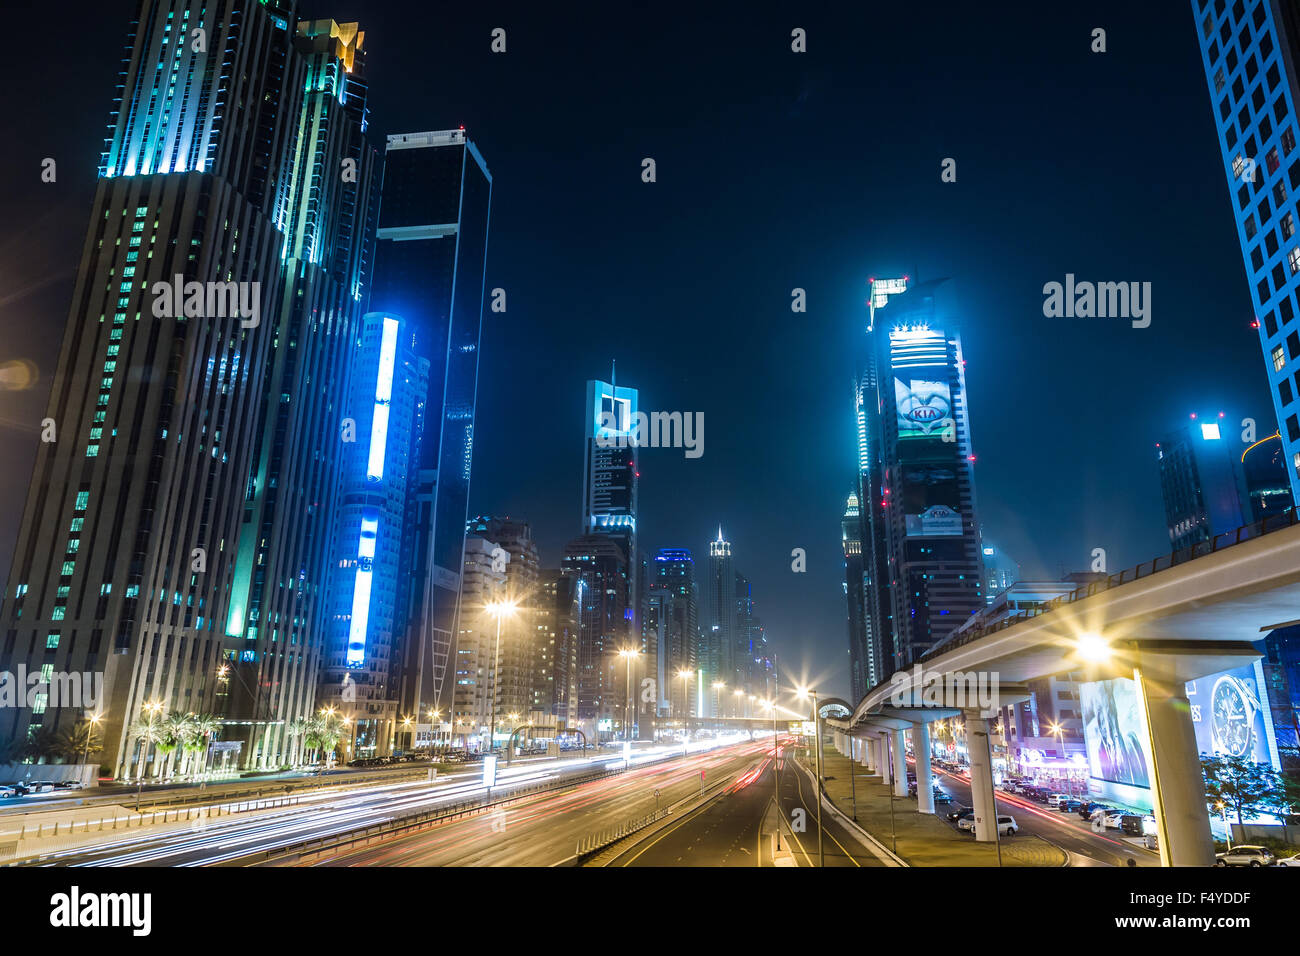 DUBAI, UAE - JANUARY 10: View of Sheikh Zayed Road skyscrapers in Dubai, UAE on JANUARY 10, 2013. More than 25 skyscrapers can b Stock Photo